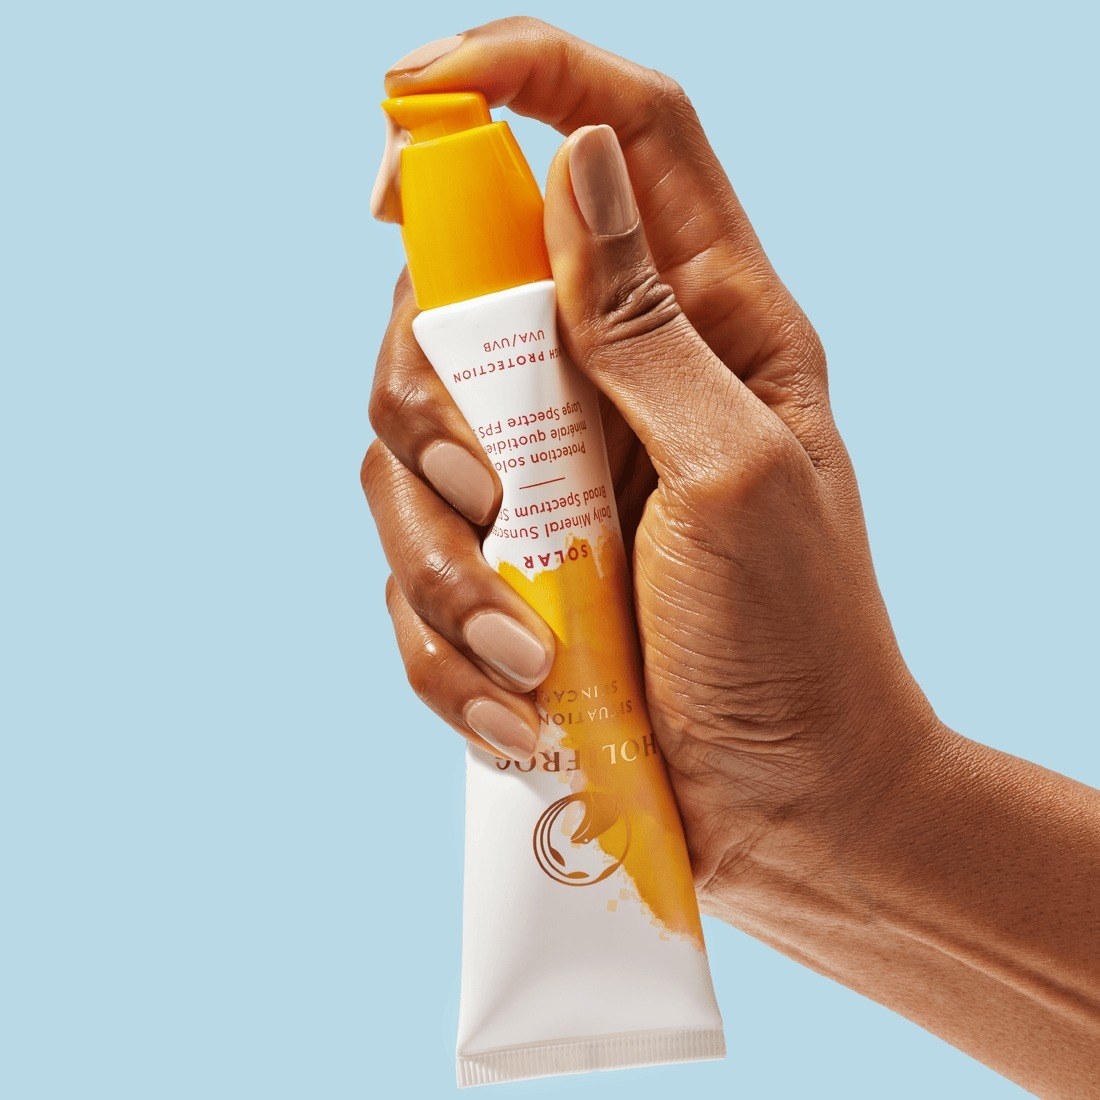 Model holding the Holifrog sunscreen and squeezing some of the sunscreen out of the tube